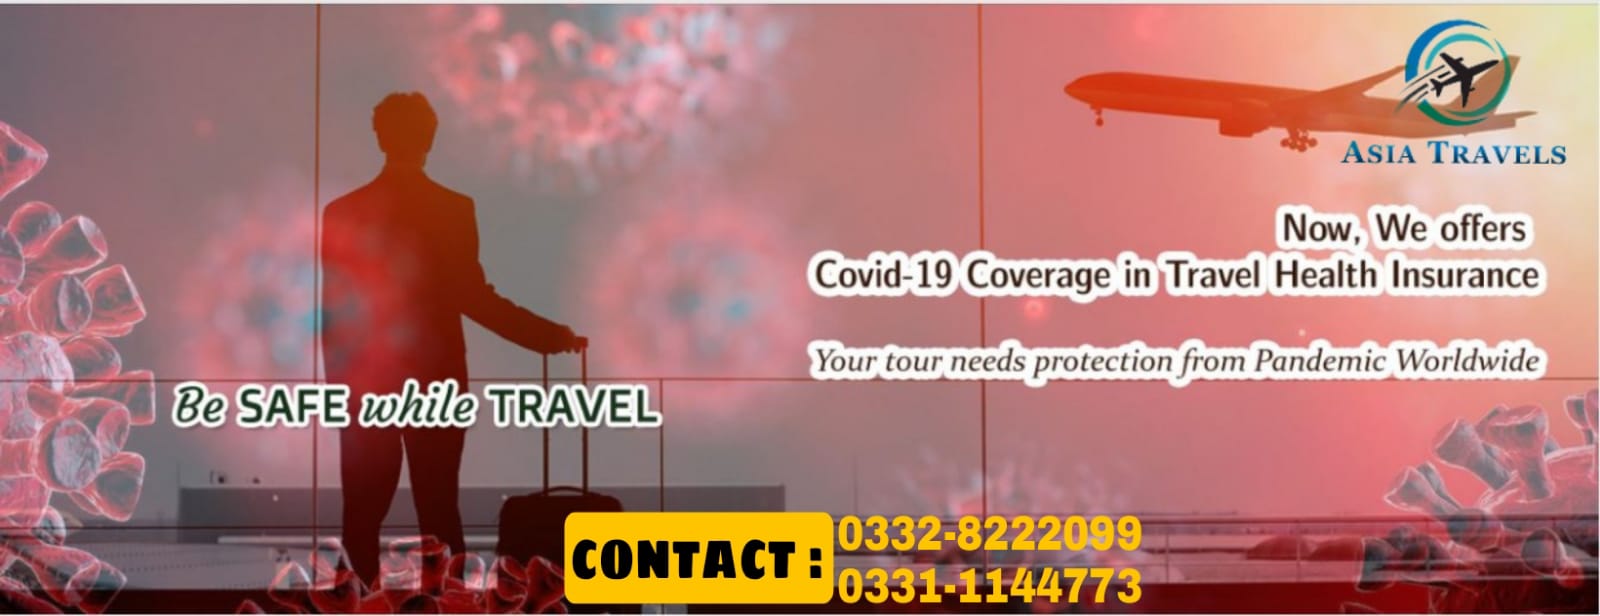 Travel Insurance Services 